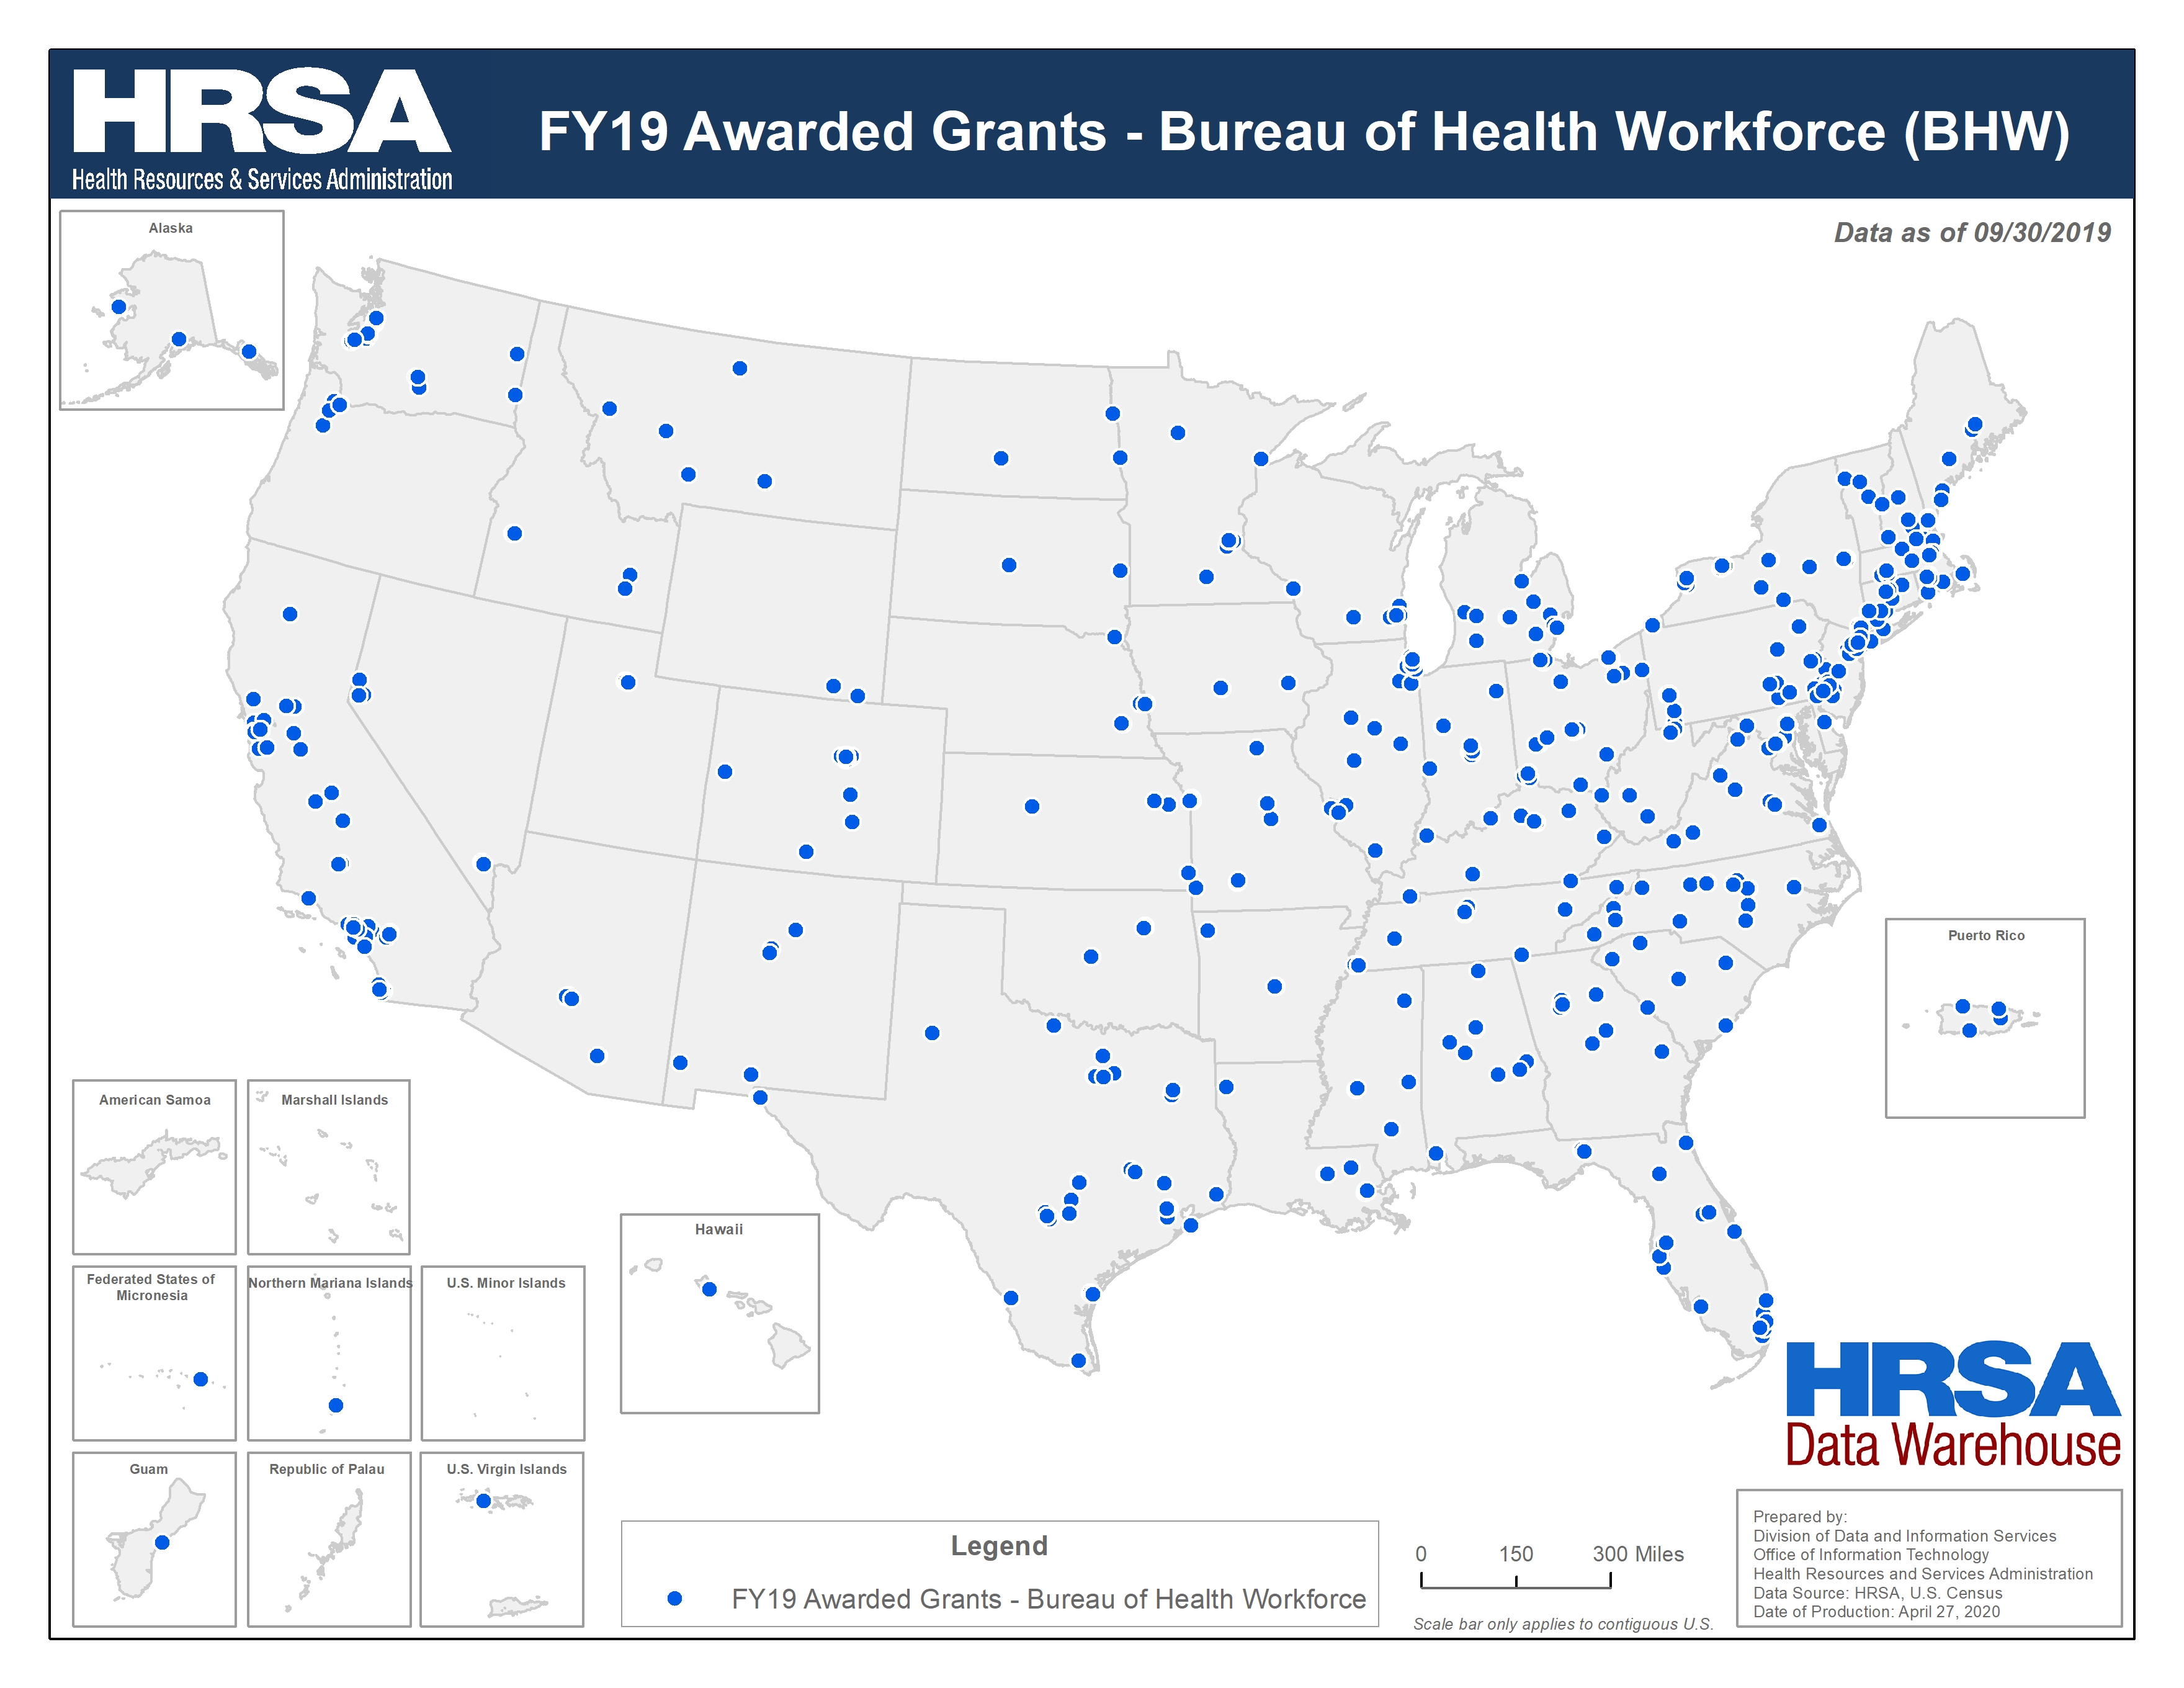 Preview Map of FY19 Awarded Grants - Bureau of Health Workforce (BHW)